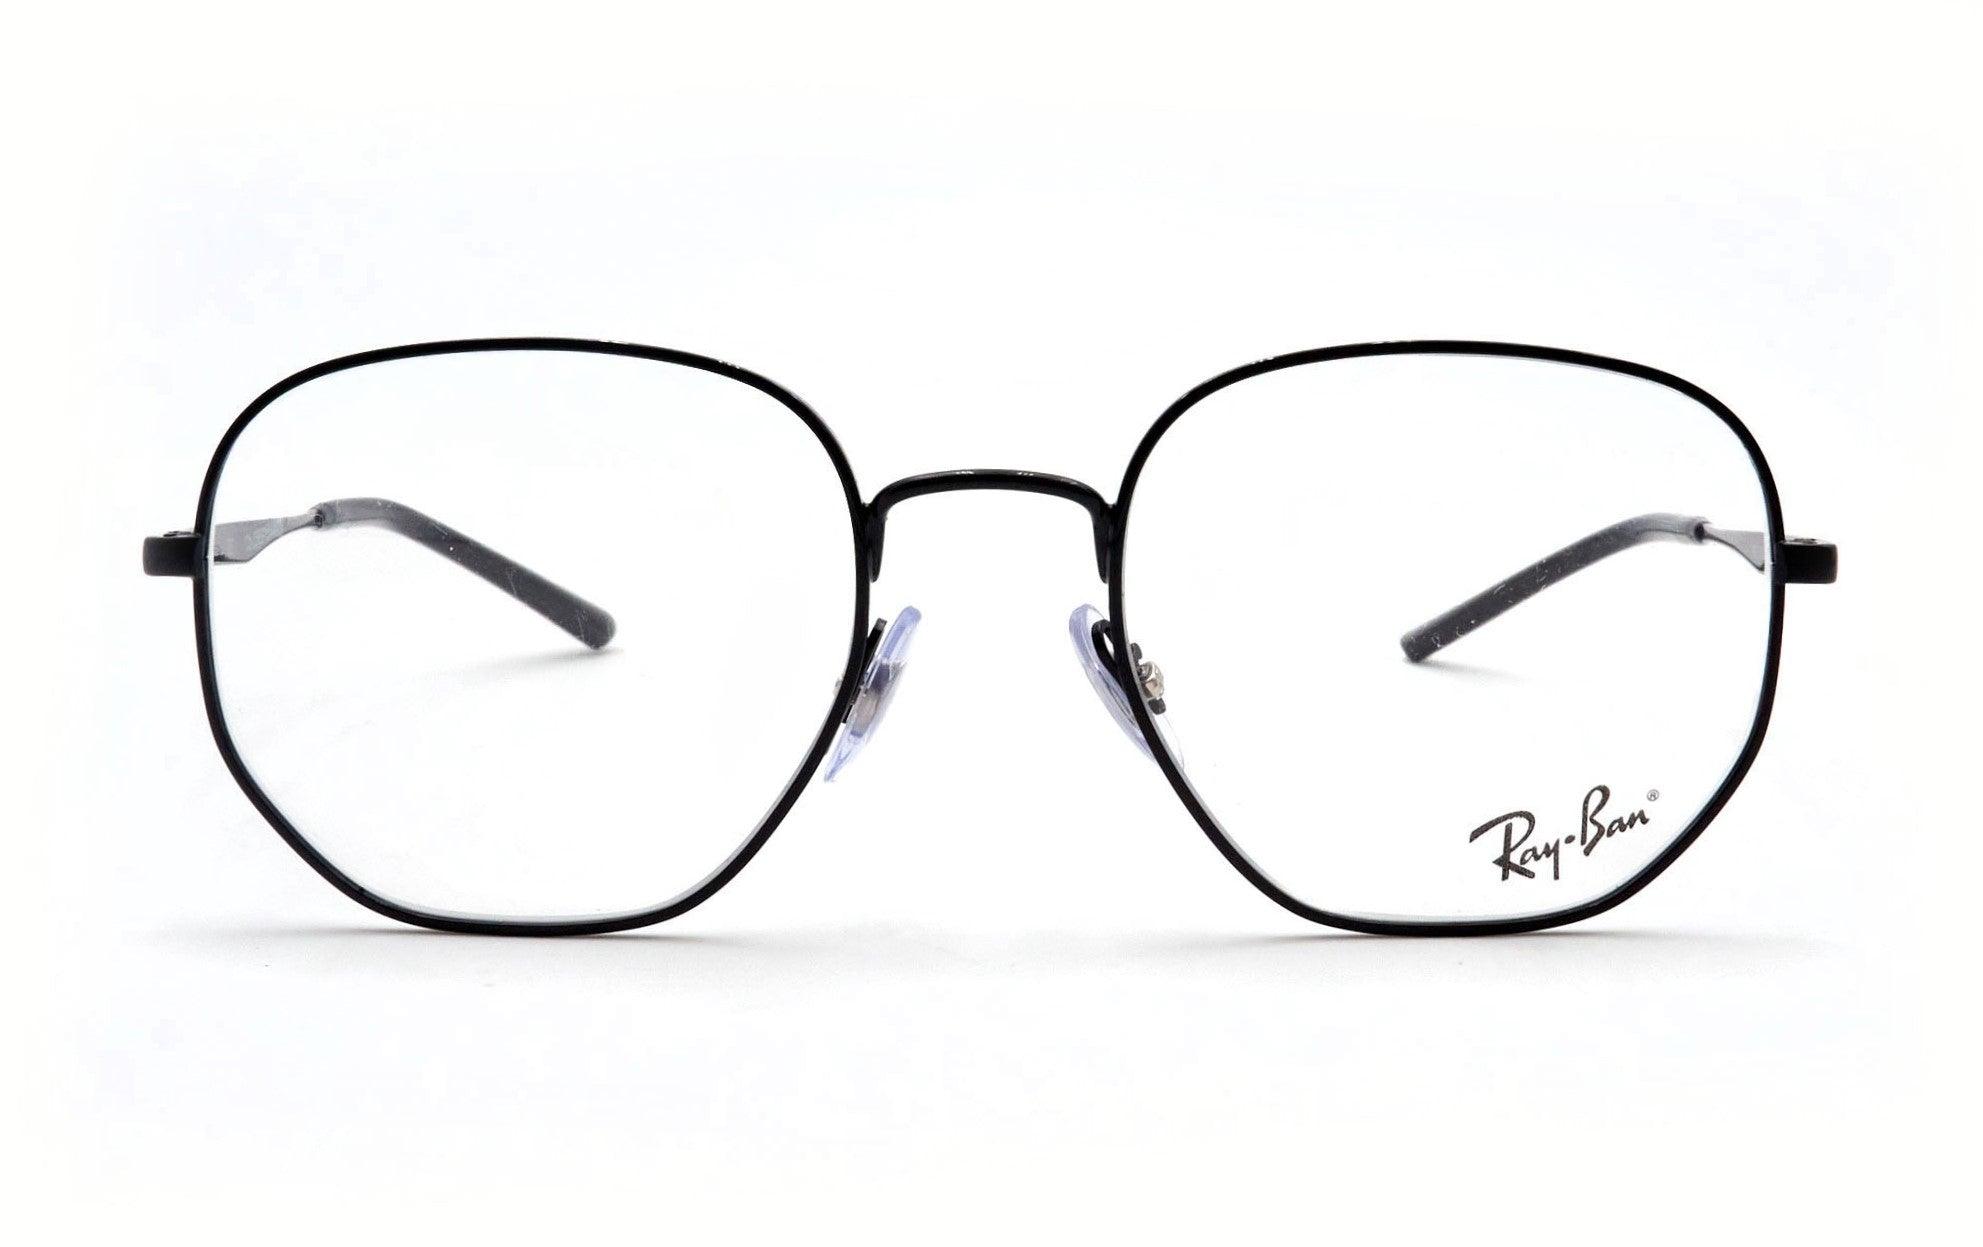 RAY BAN 3682VL 2509 - Opticas Lookout